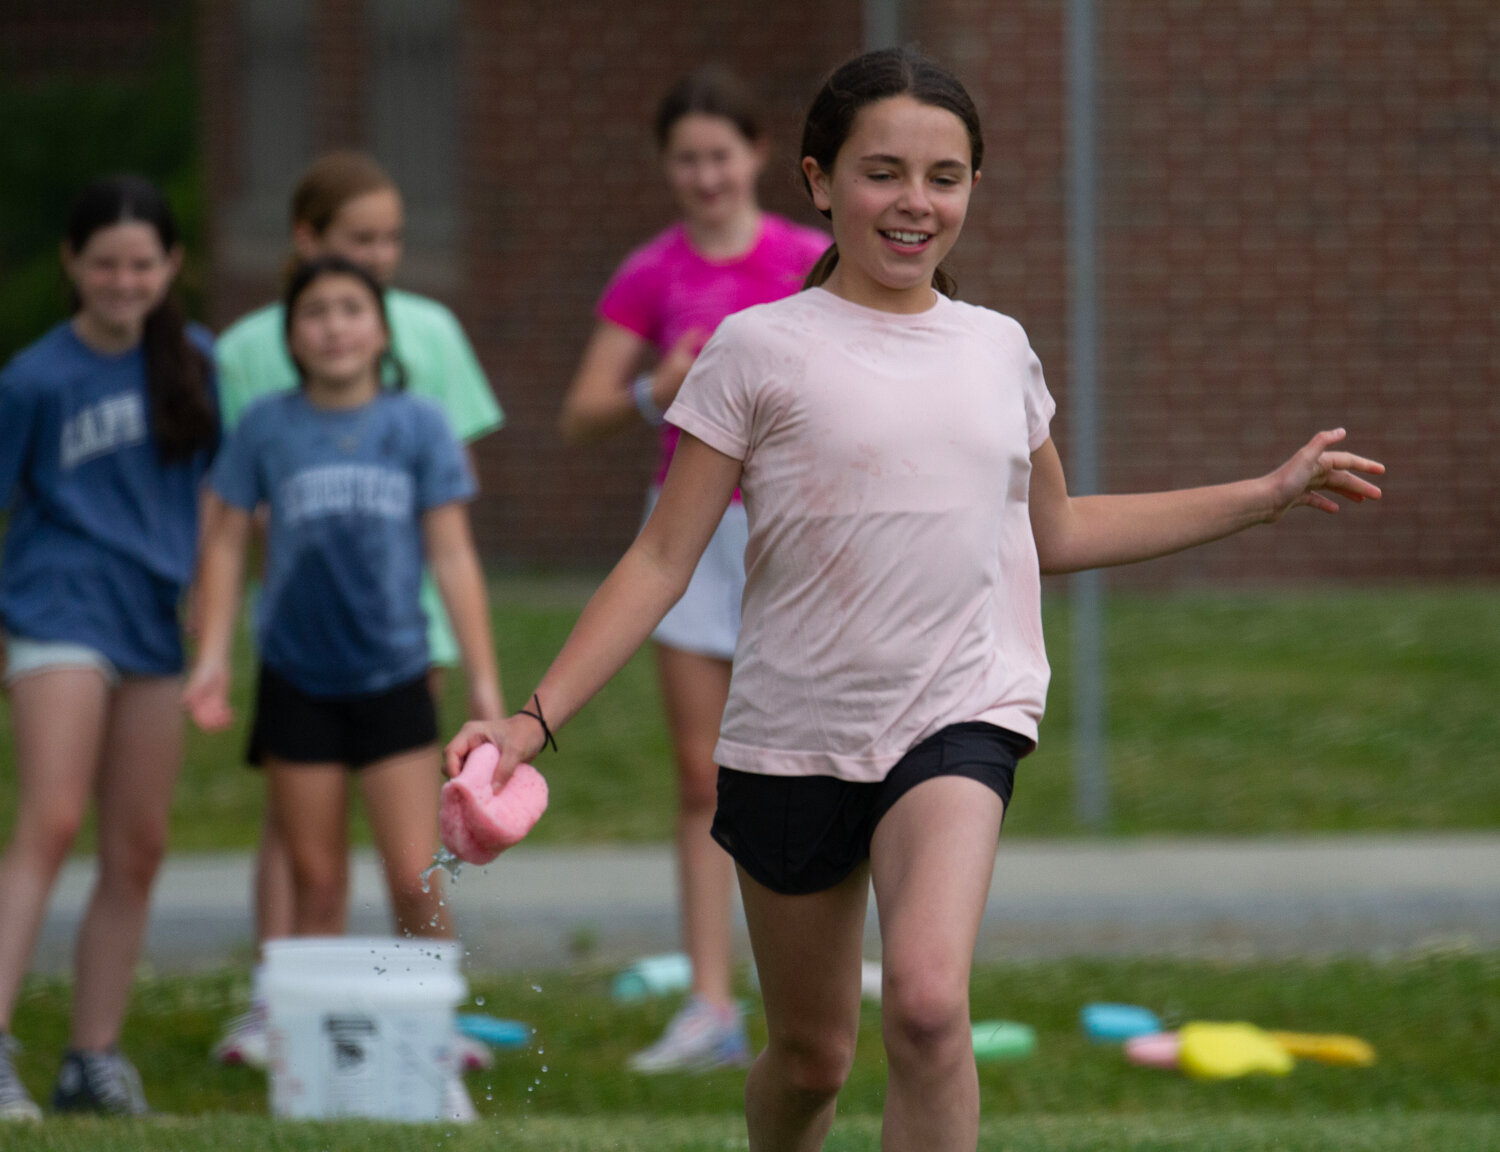 Finley Mattos competes in the sponge race during Lime Cluster's Field Day event last week.